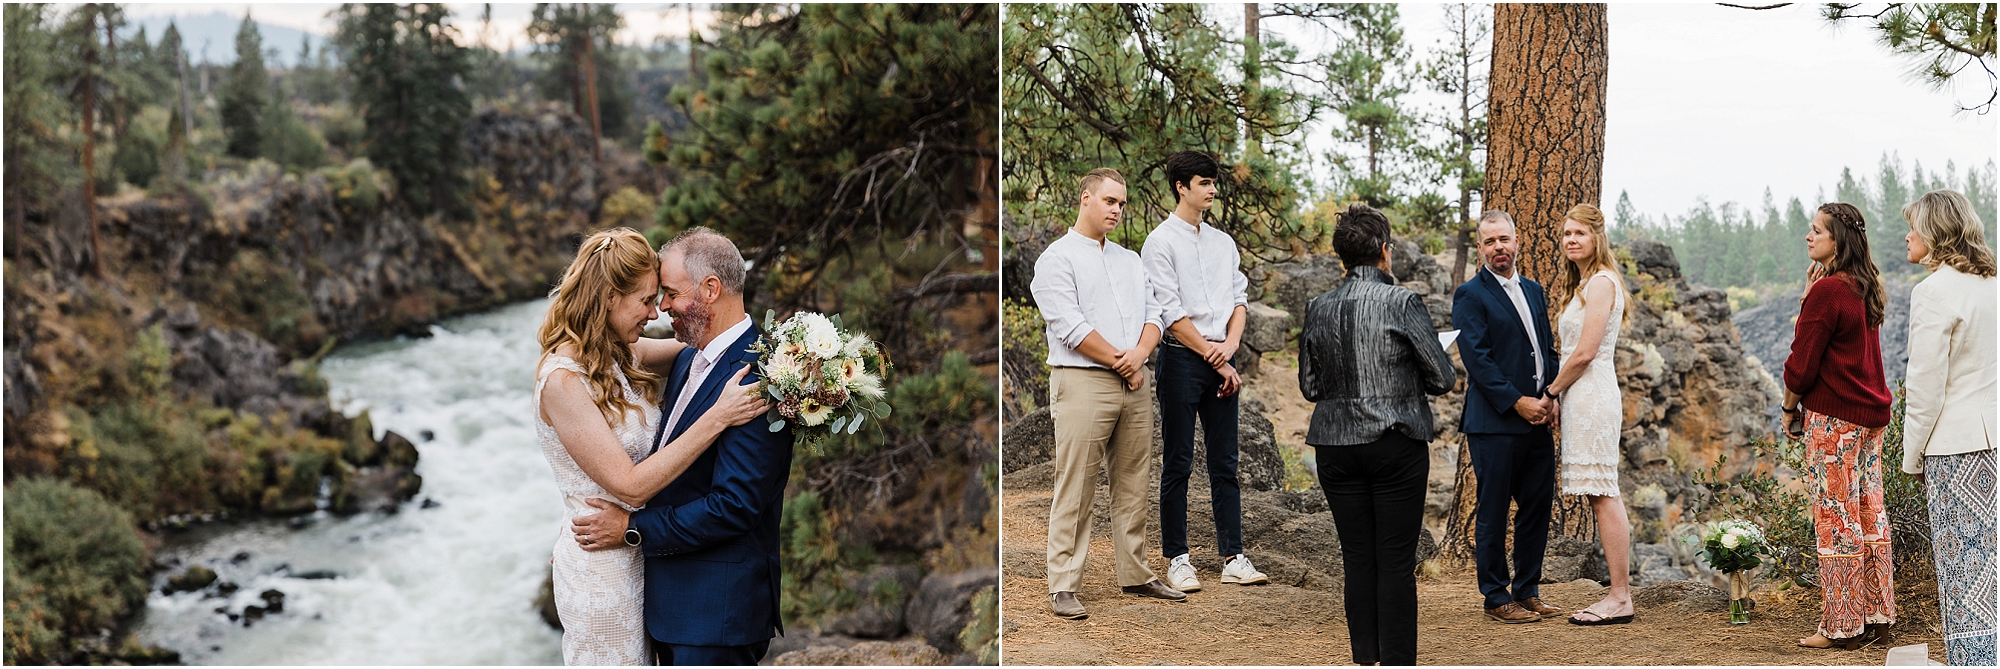 An intimate ceremony with just the couple's choice family as they choose to elope in Bend Oregon along the Deschutes River. | Erica Swantek Photography